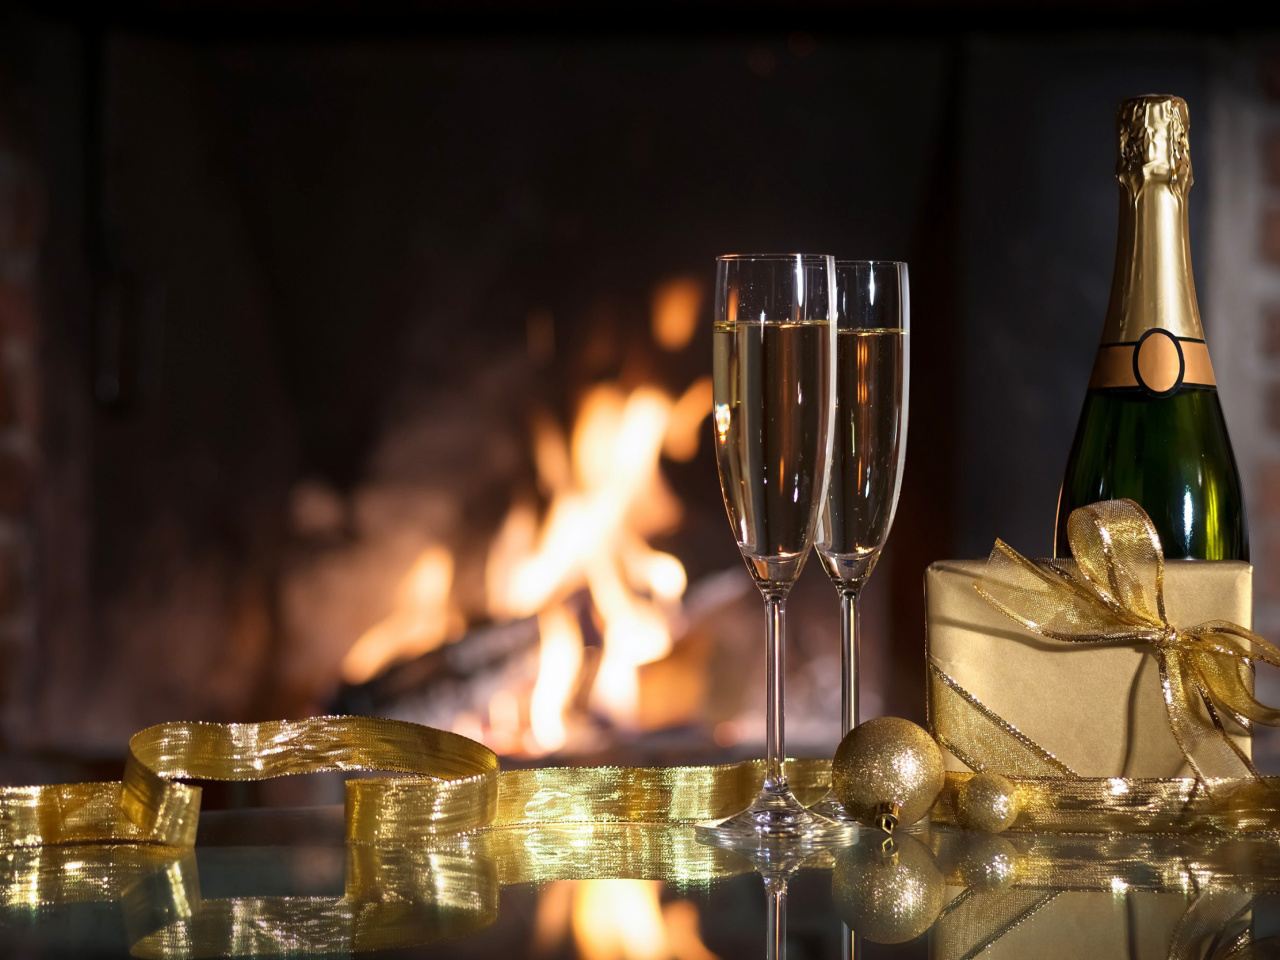 Das Champagne and Fireplace Wallpaper 1280x960